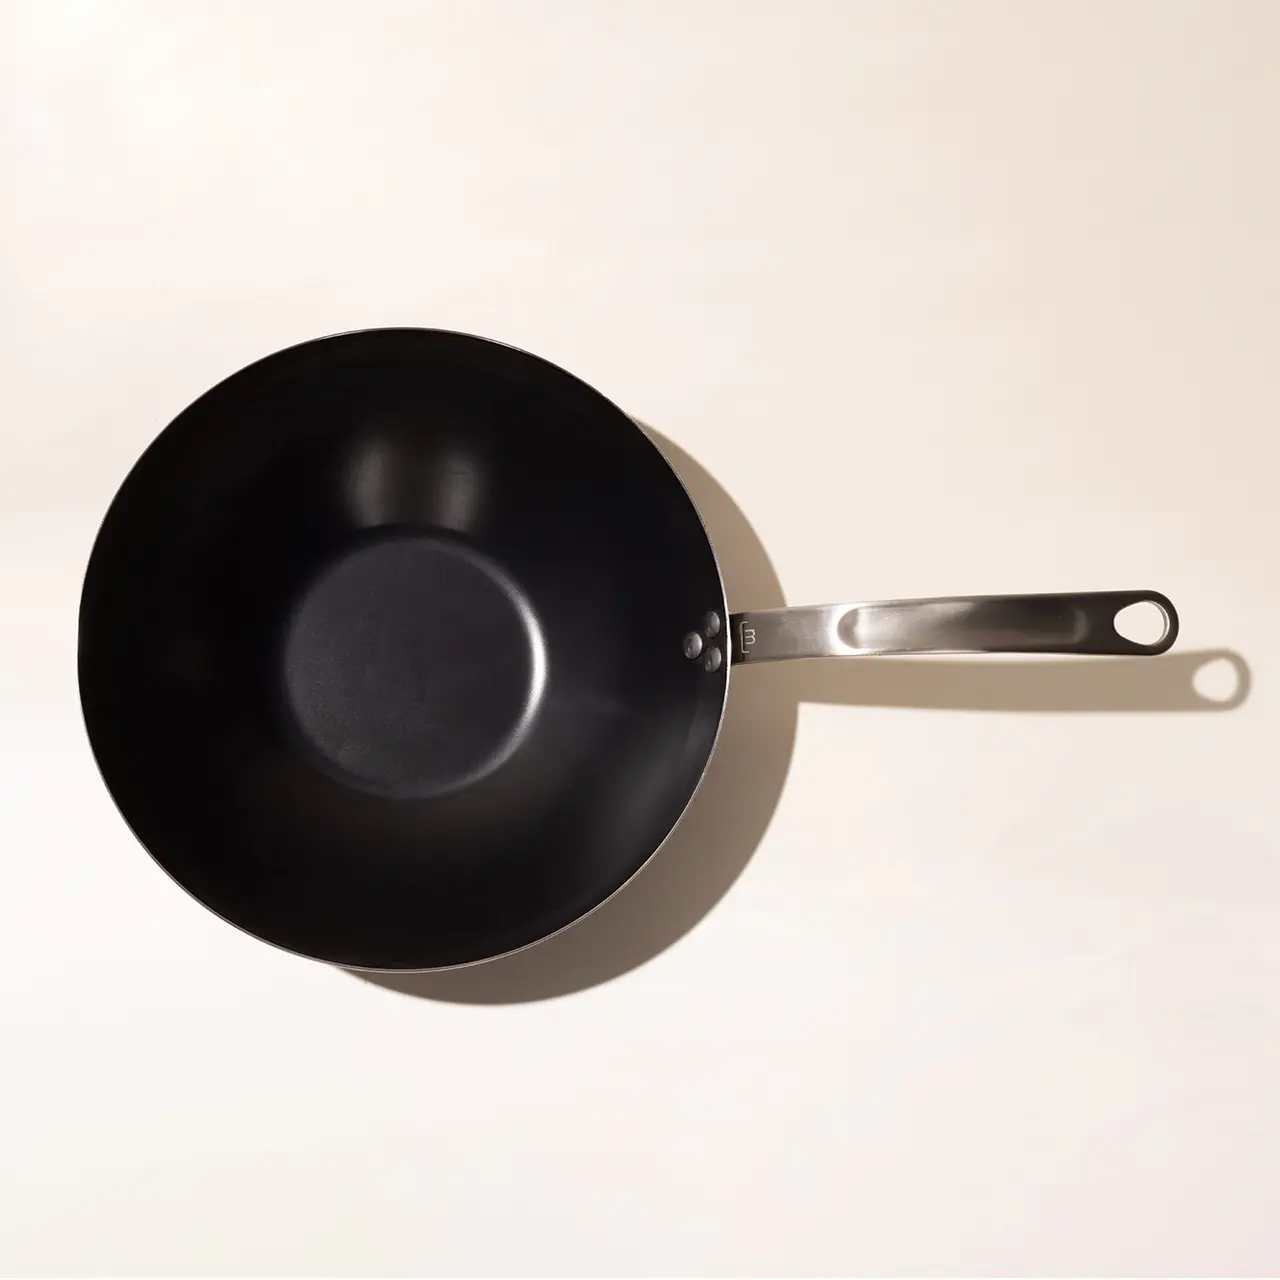 Best Carbon Steel Wok | Induction Compatible | Lifetime Warranty | Made in